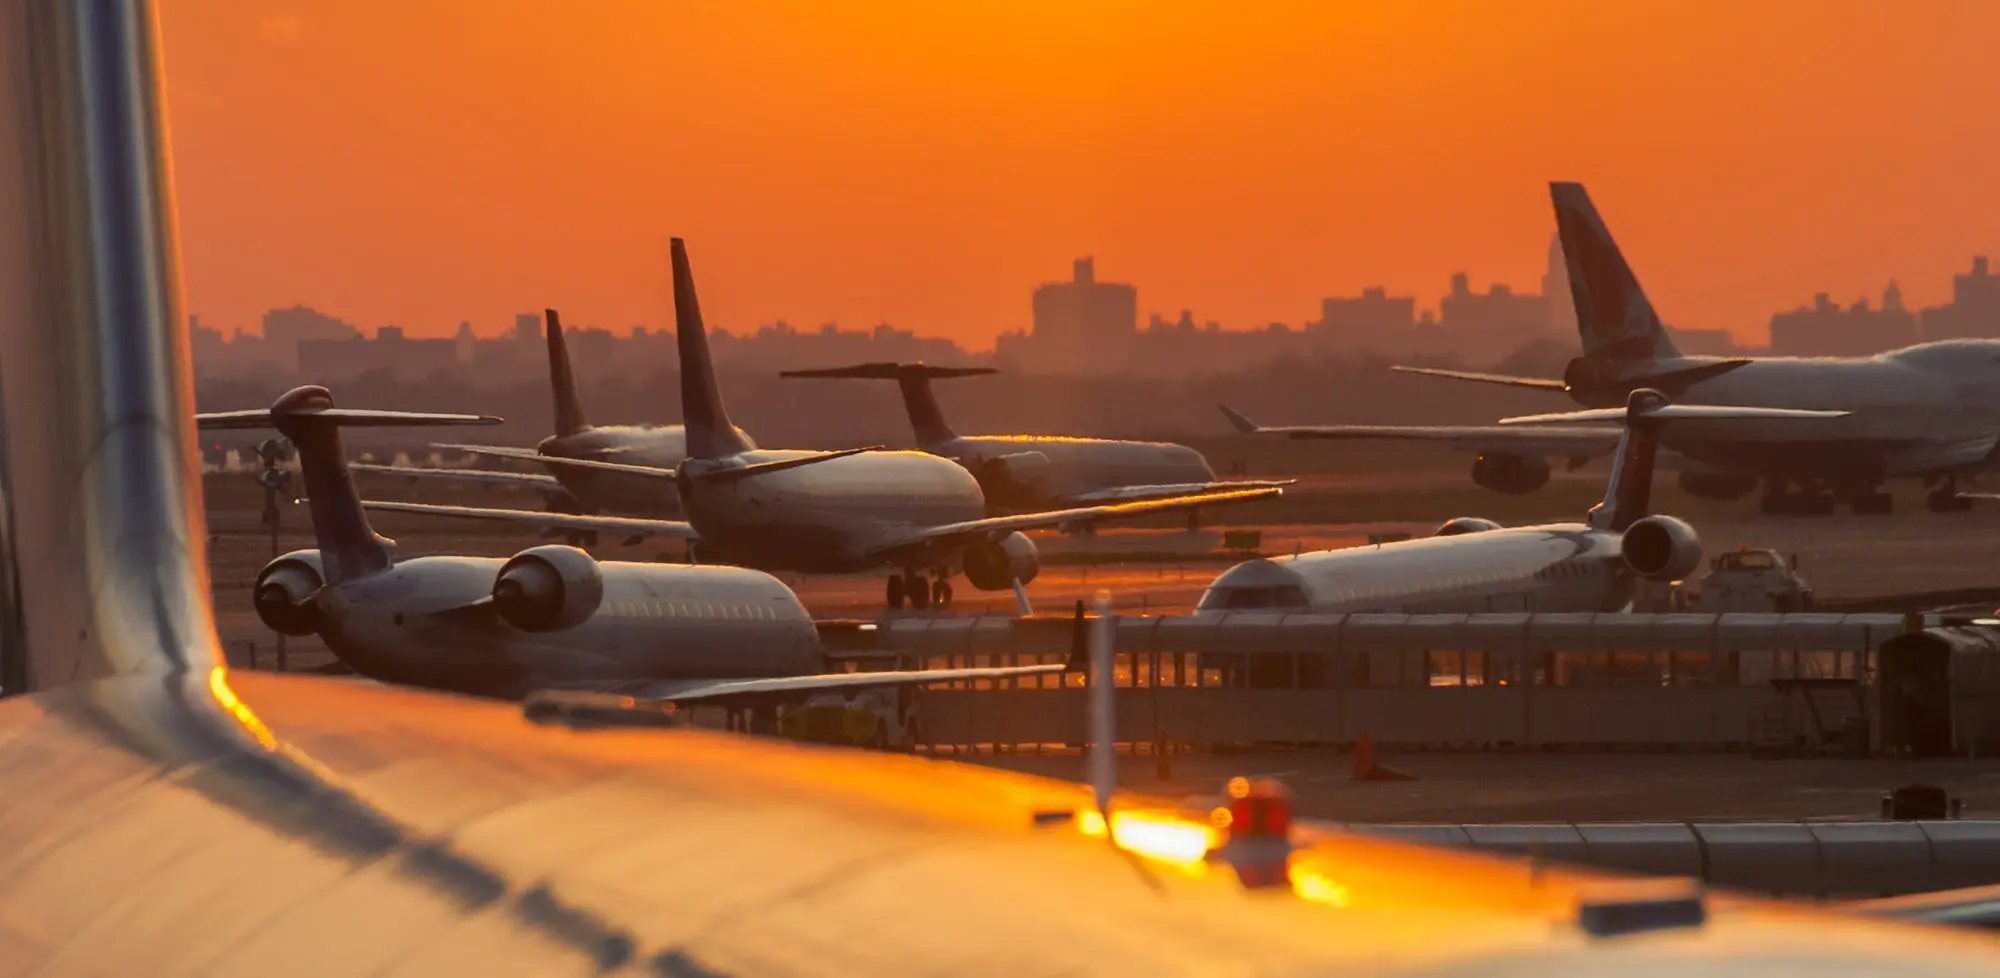 Image of several airplanes at an airport at sunset. 